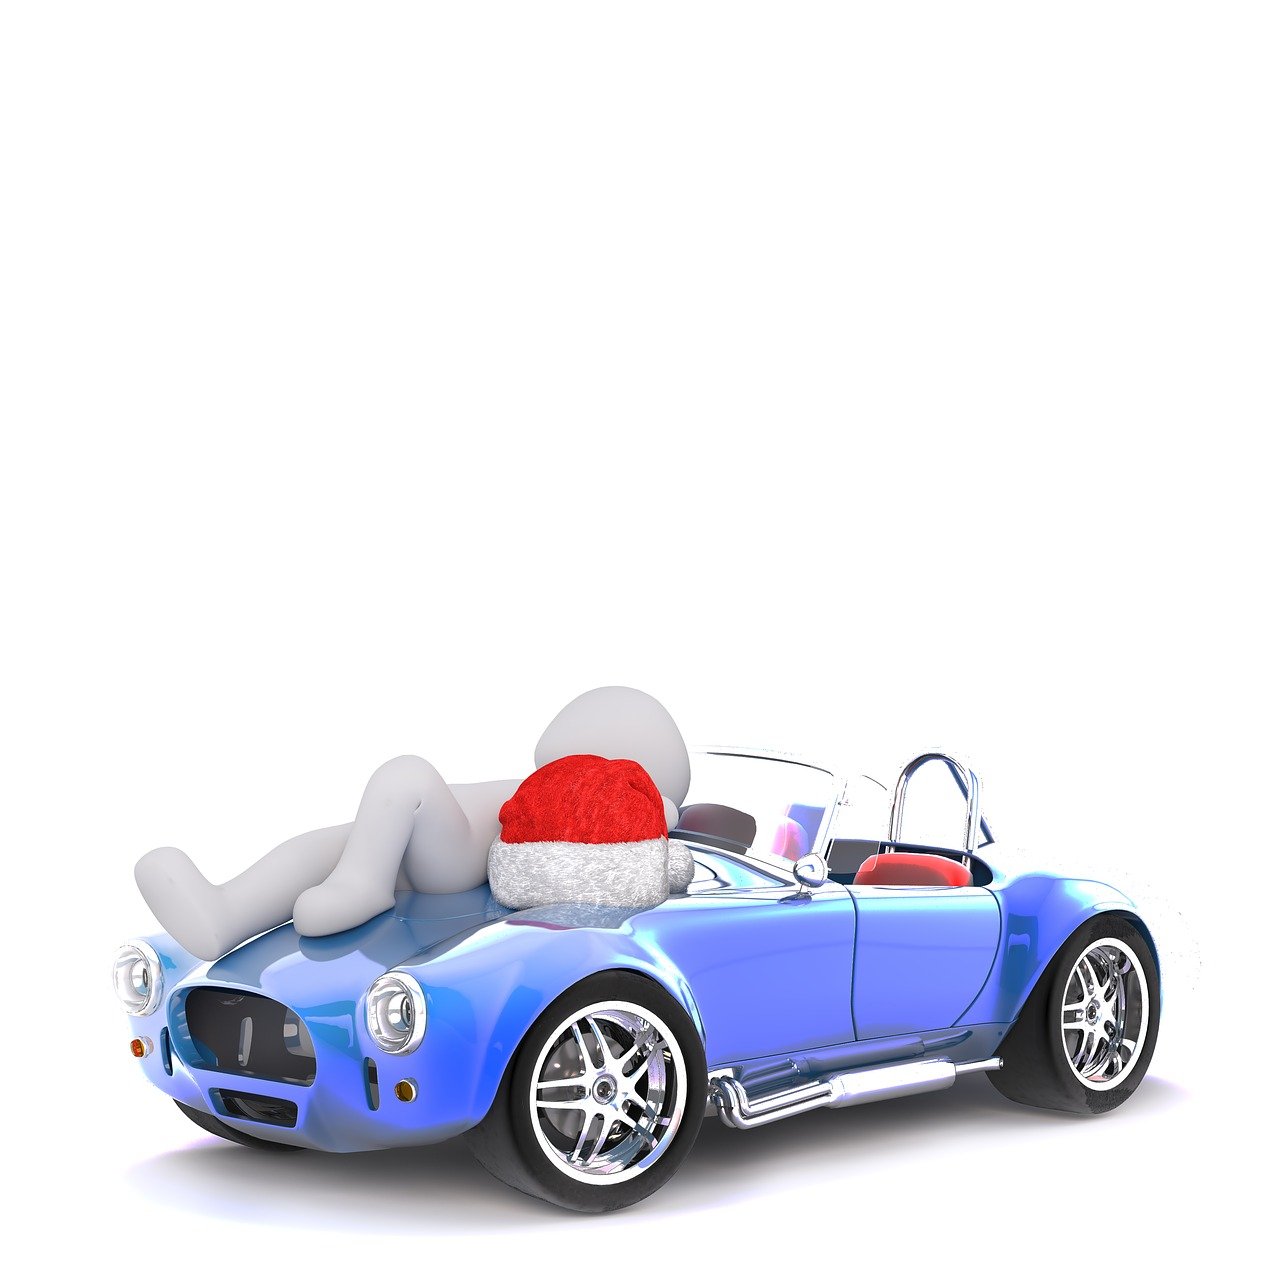 a person laying on top of a blue sports car, a 3D render, purism, christmas, humorous illustration, on the white background, flash photo